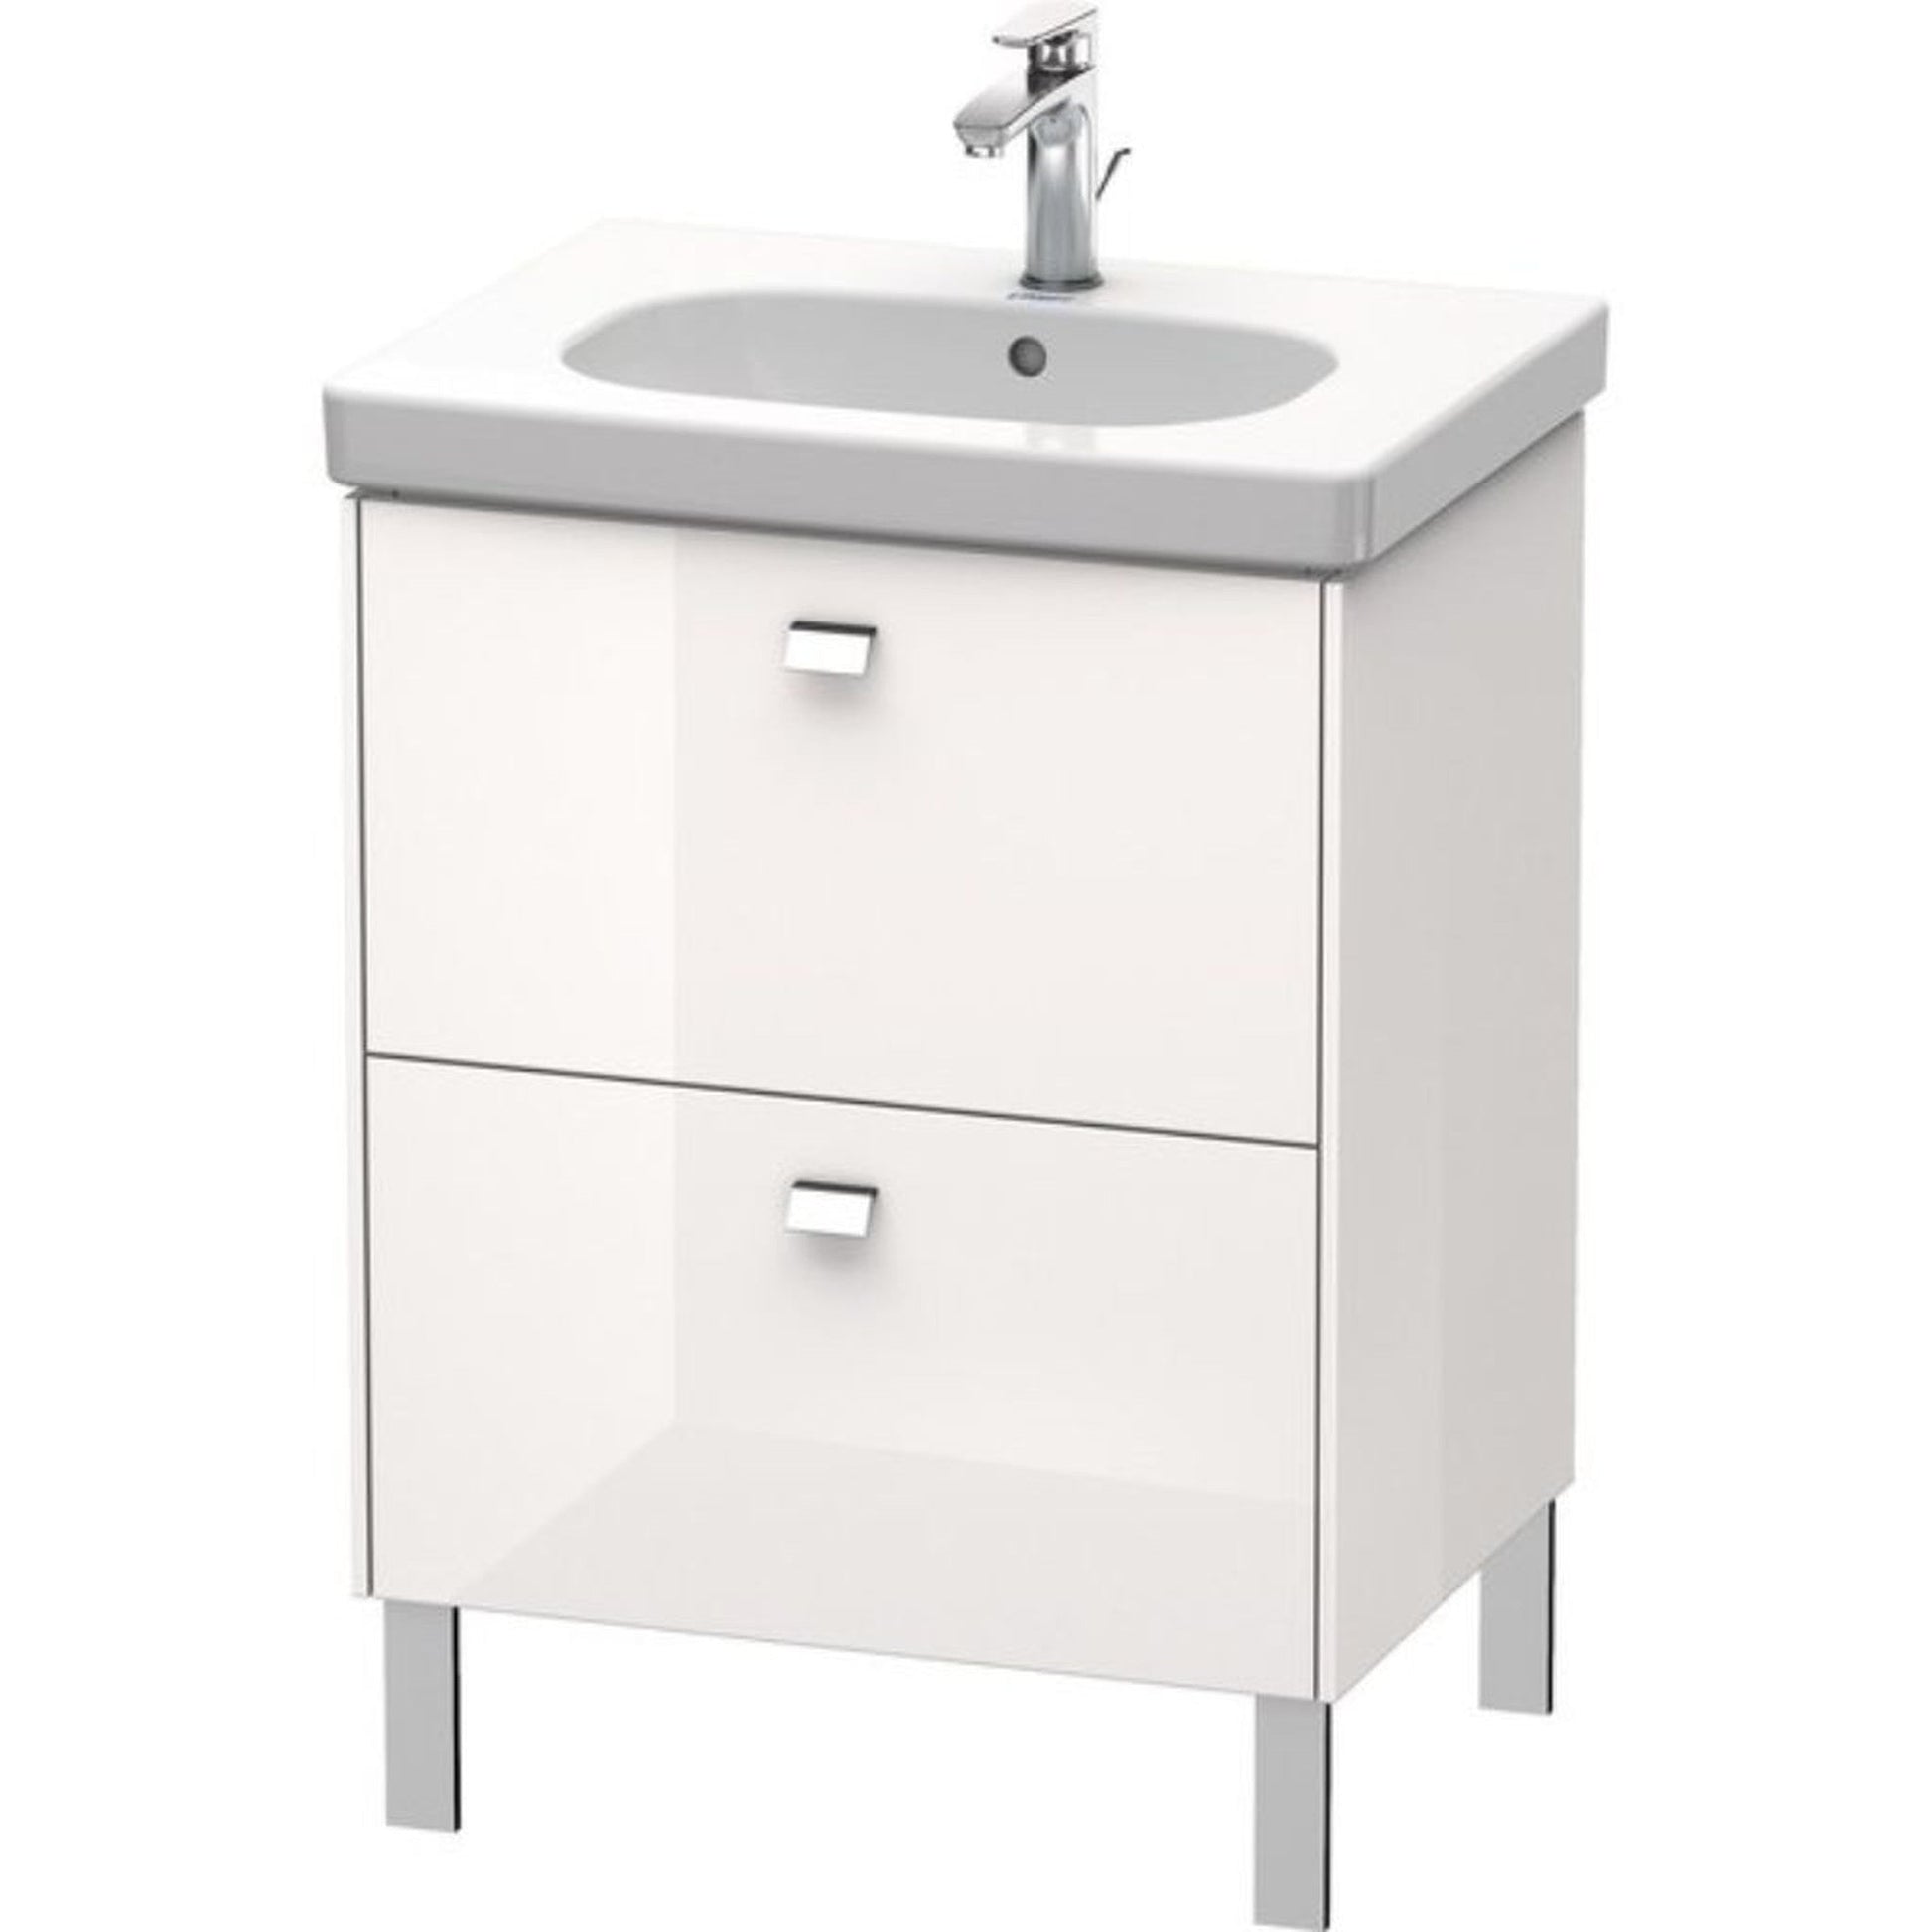 Duravit Brioso BR44250 24" x 27" x 18" Two Drawer Floor Standing Vanity Unit in White High Gloss and Chrome Handle